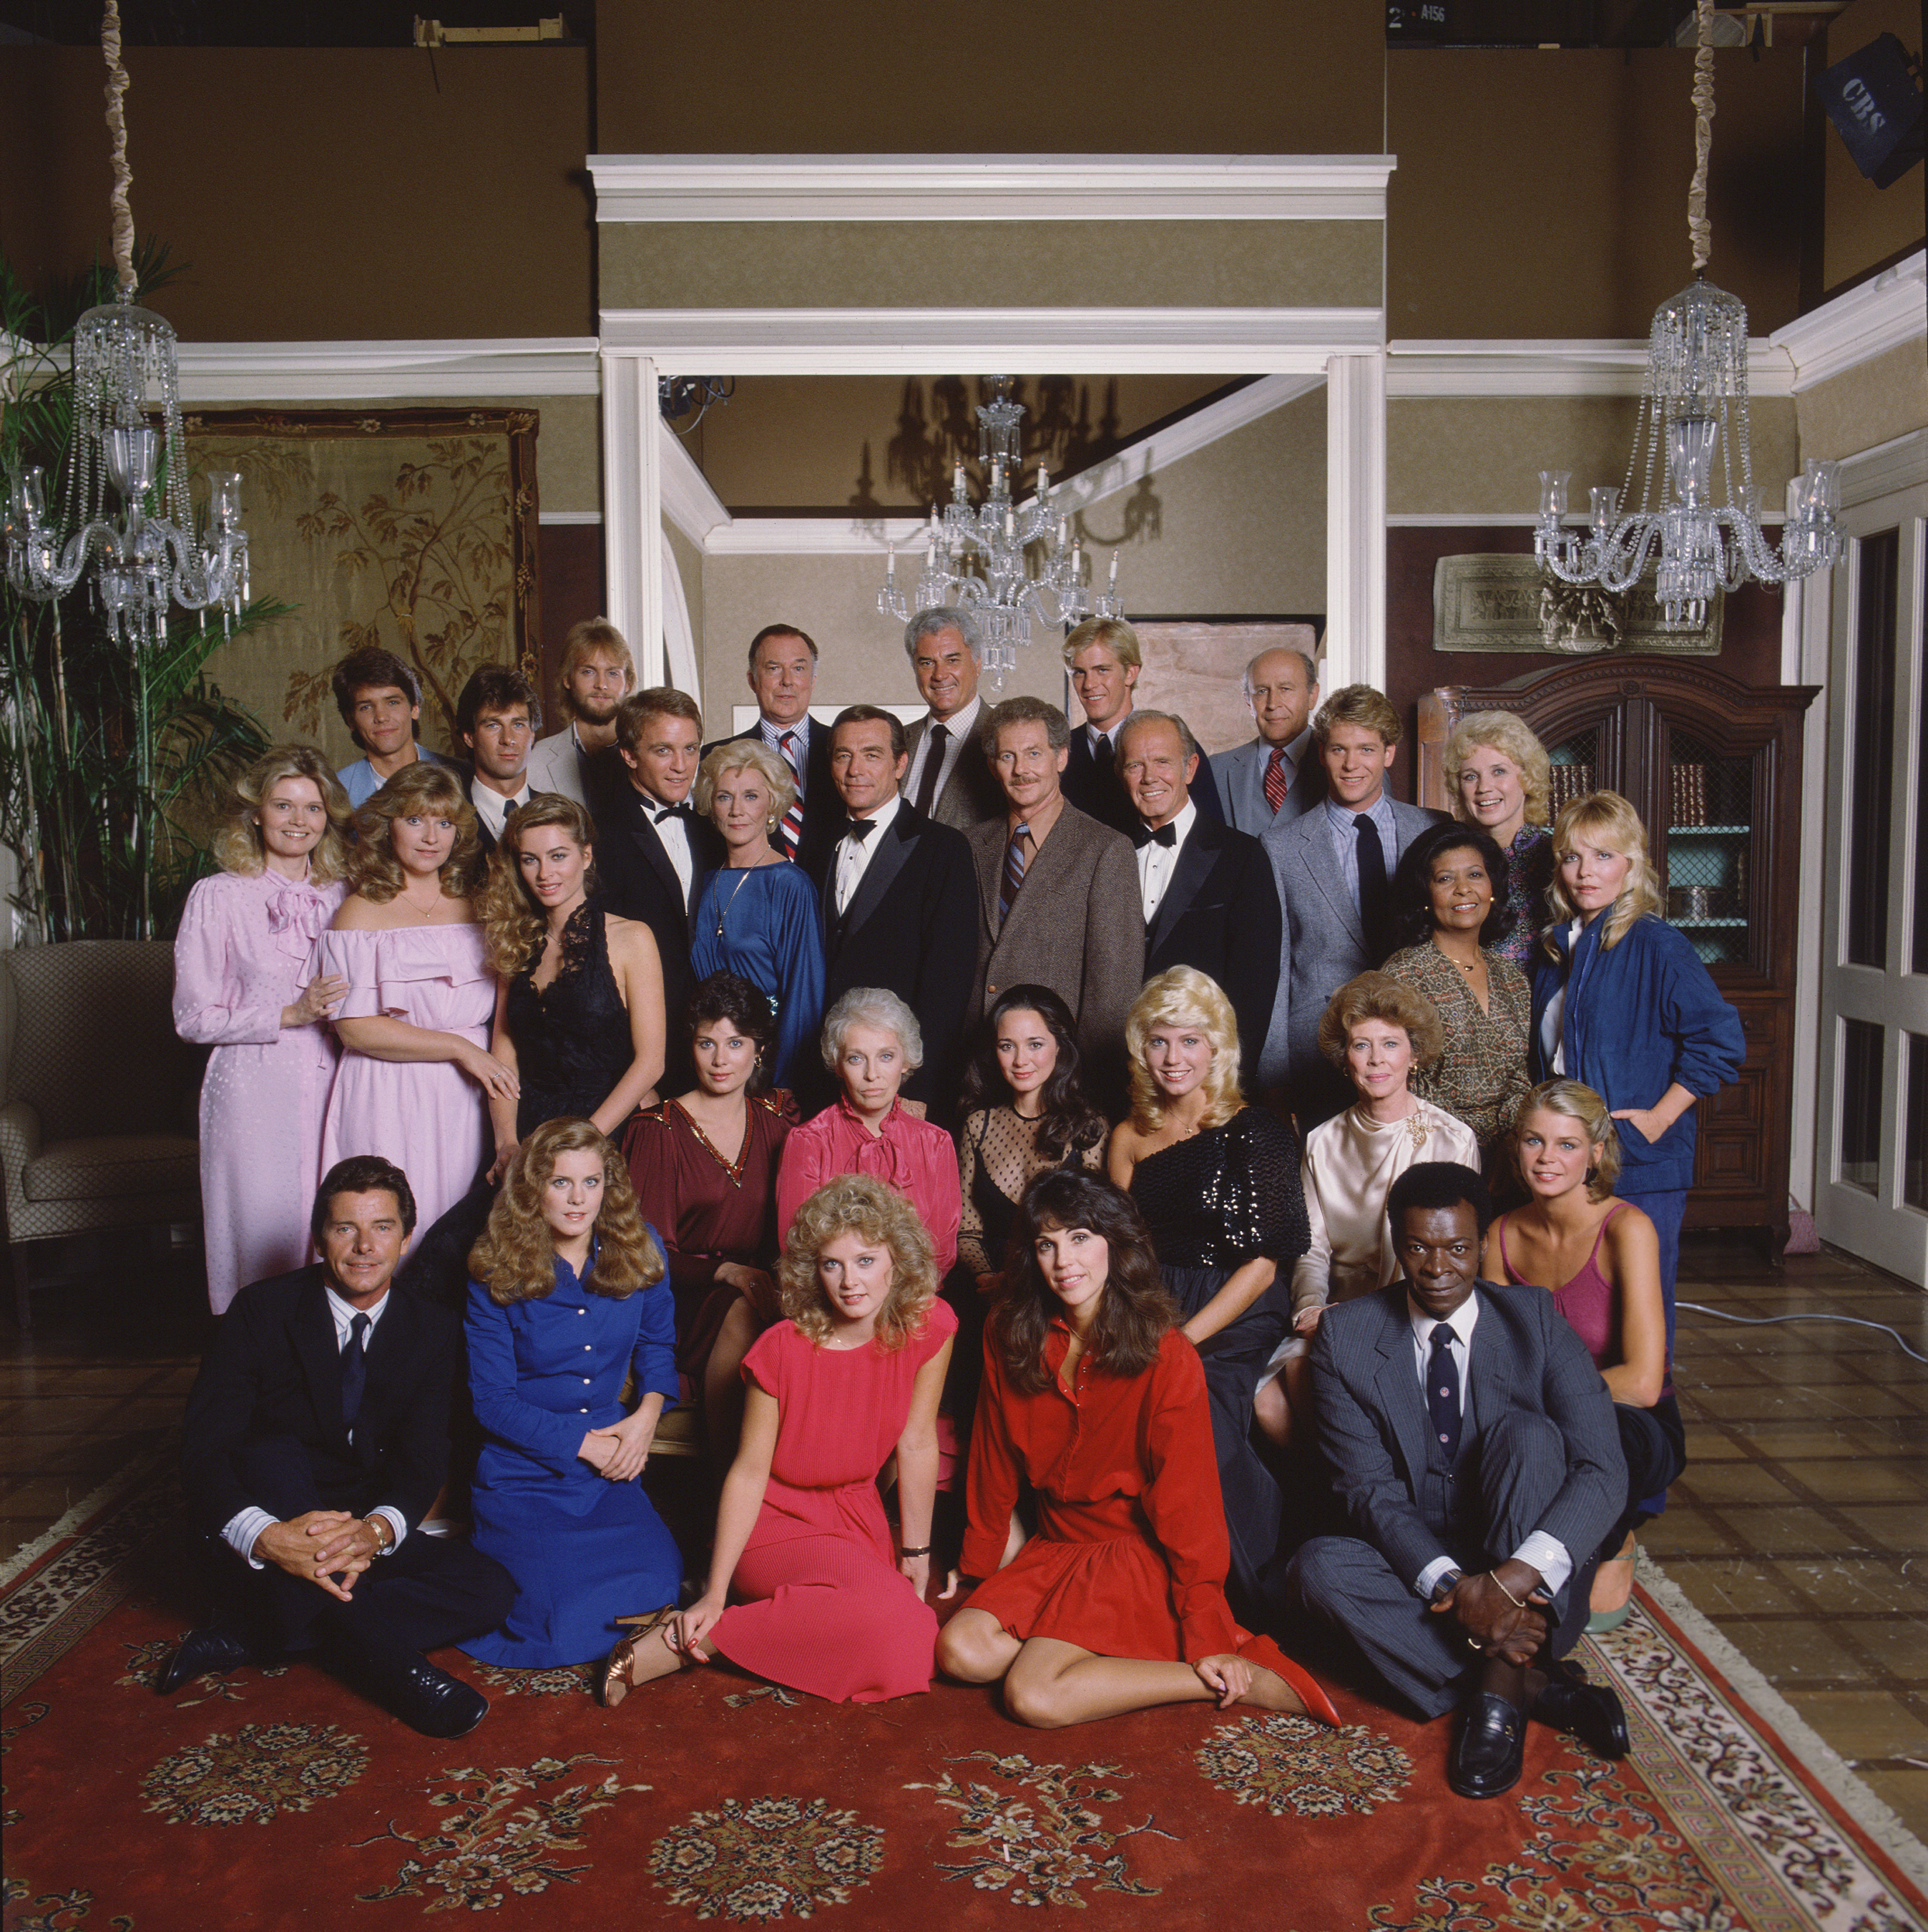 The cast of "The Young and the Restless" in 1982 | Source: Getty Images